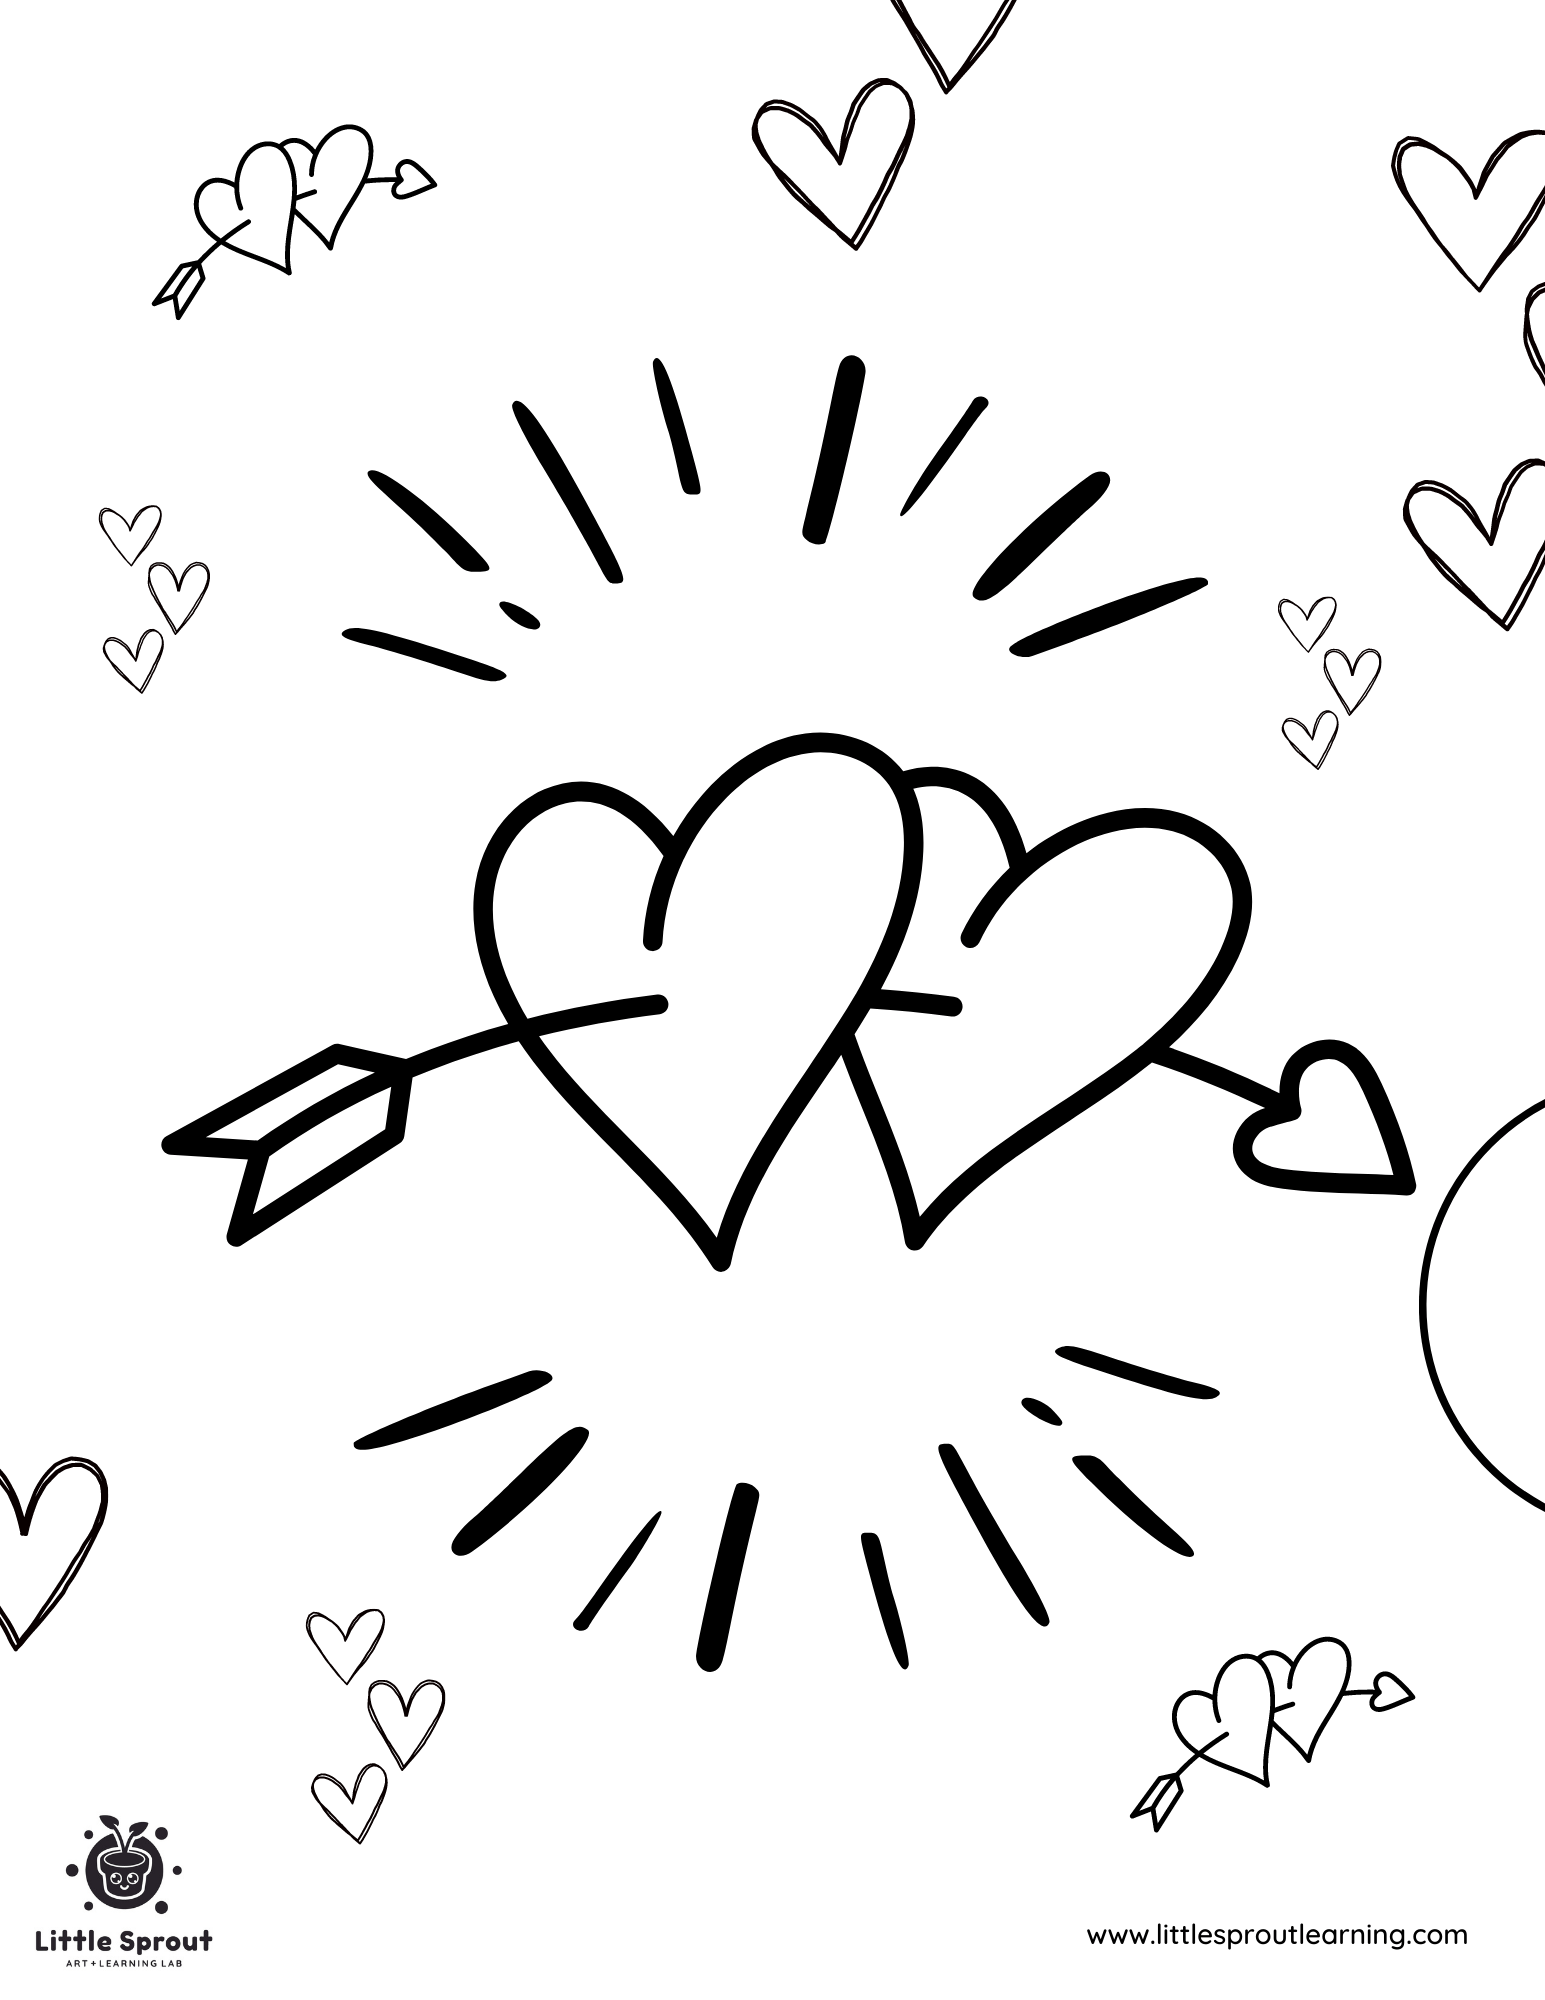 Bursting Love Heart Coloring Page